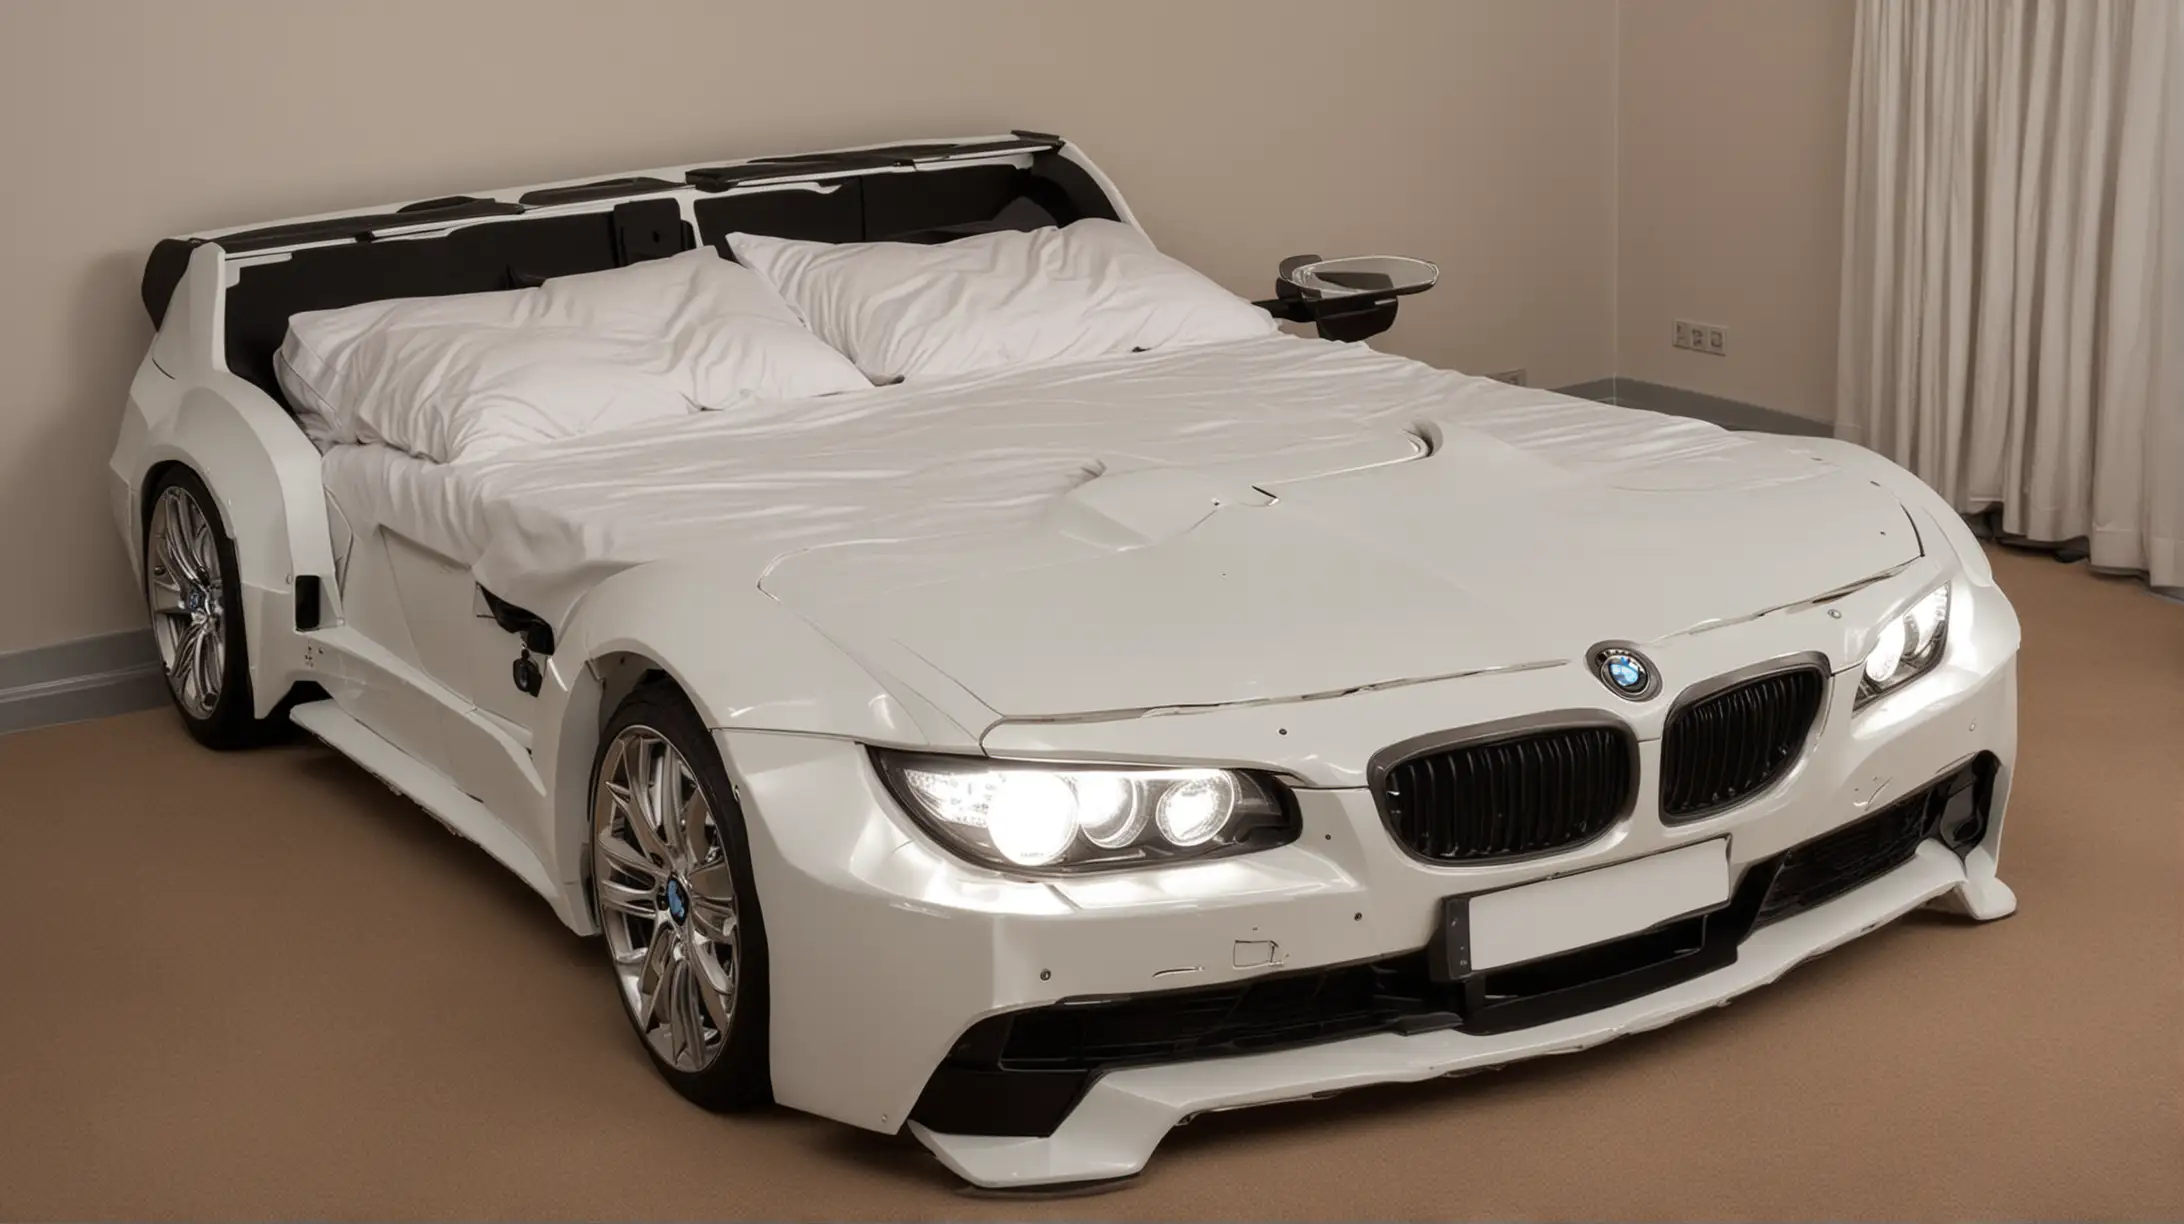  Double bed in the shape of a BMW car with headlights on